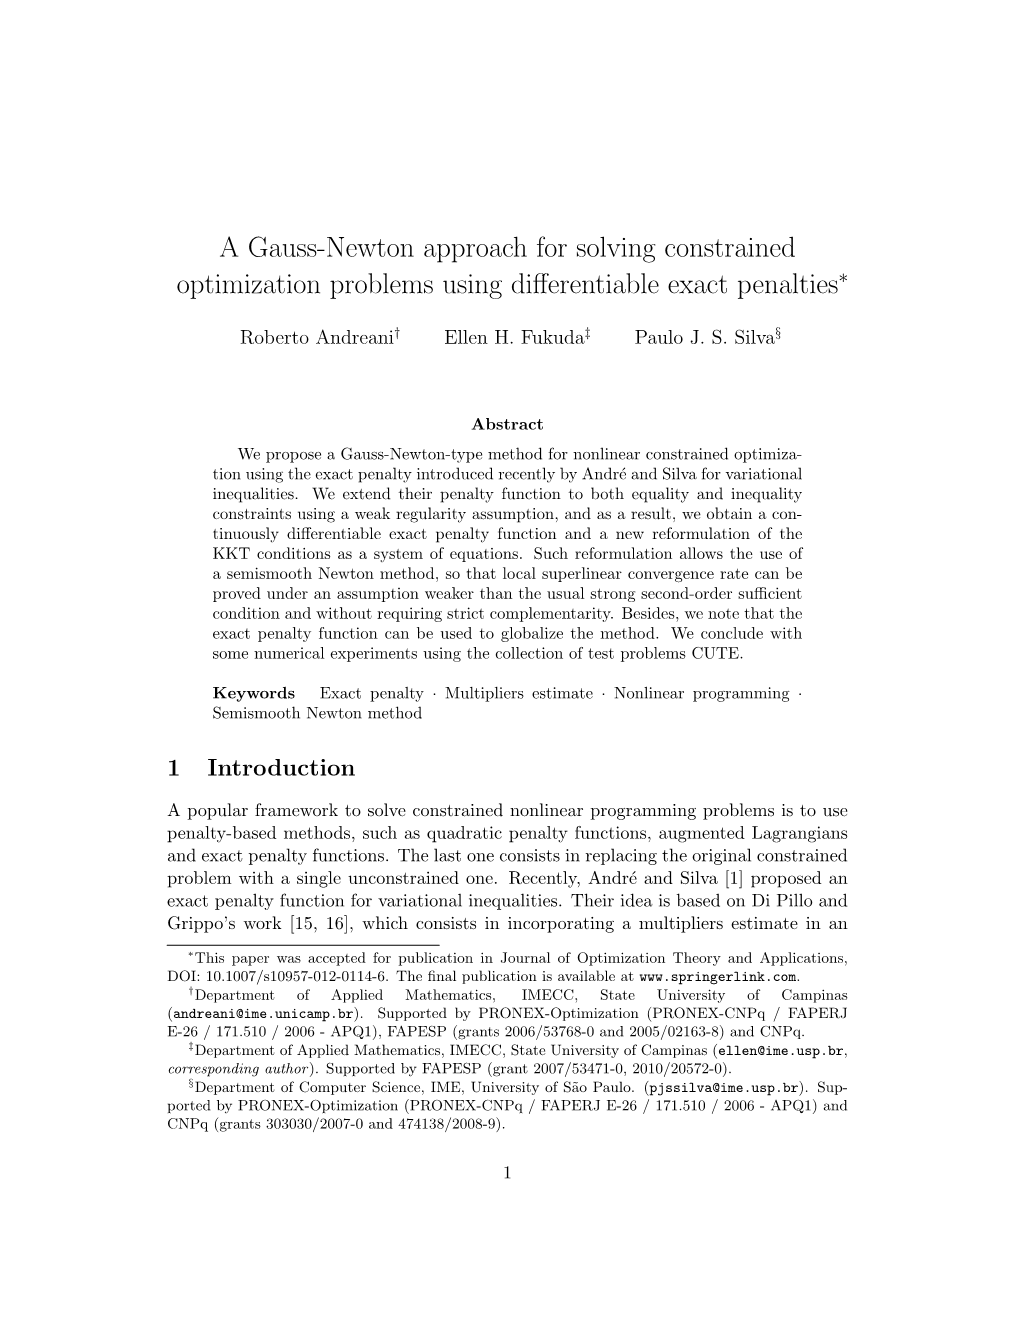 A Gauss-Newton Approach for Solving Constrained Optimization Problems Using Diﬀerentiable Exact Penalties∗